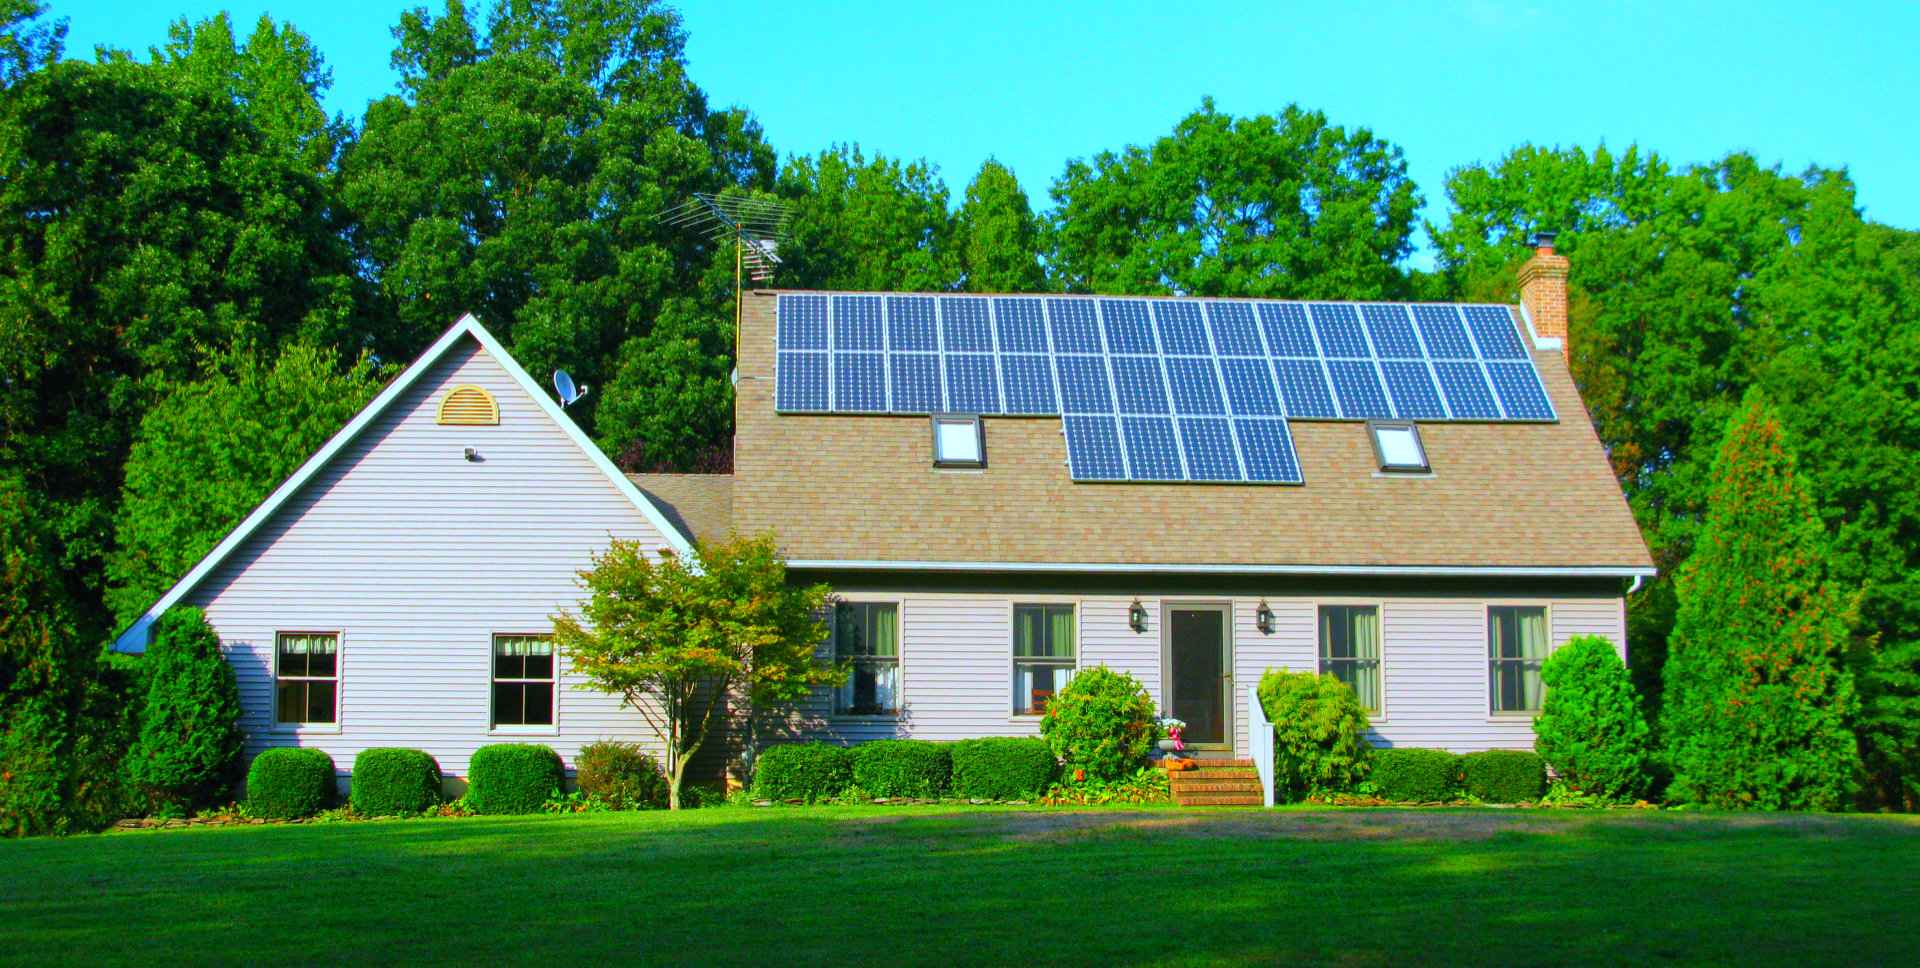 image of the house with solar panels in the roof